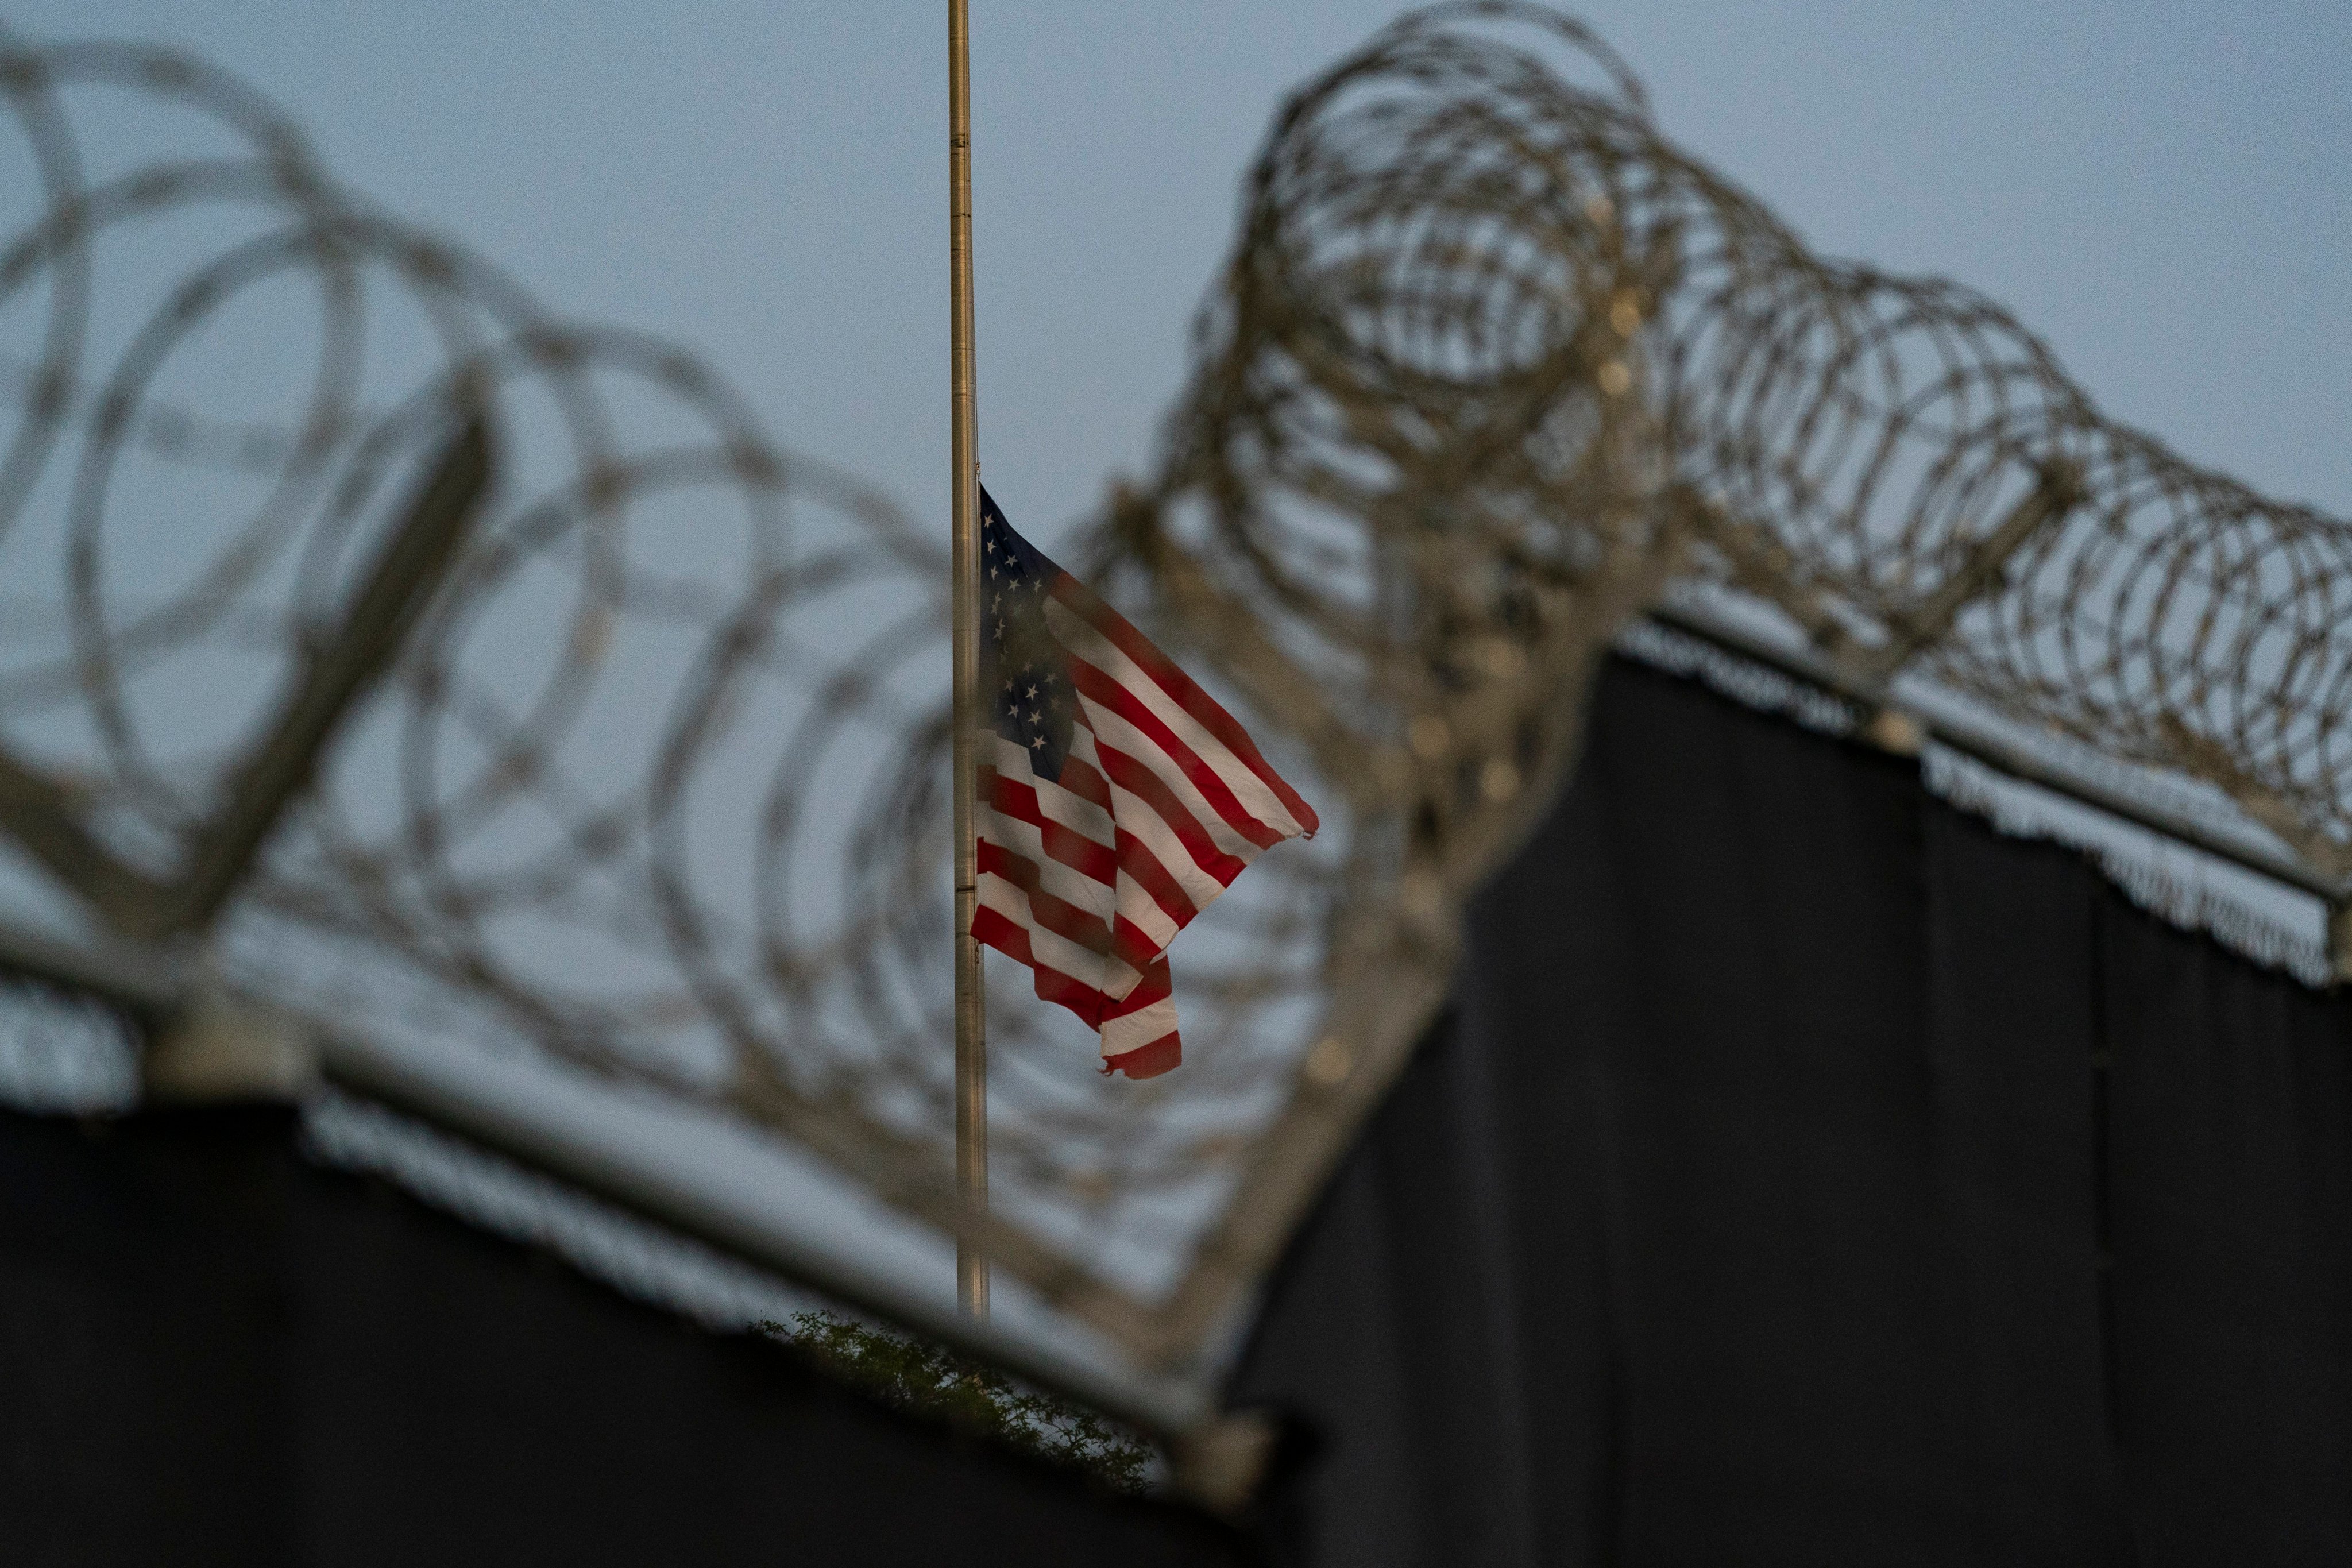 A flag flies at half-staff at Guantanamo Bay Naval Base, Cuba. Over the years, there has been a push to transfer detainees, with each one costing some US$13 million annually. Transfers often come about through plea deals. Photo: AP